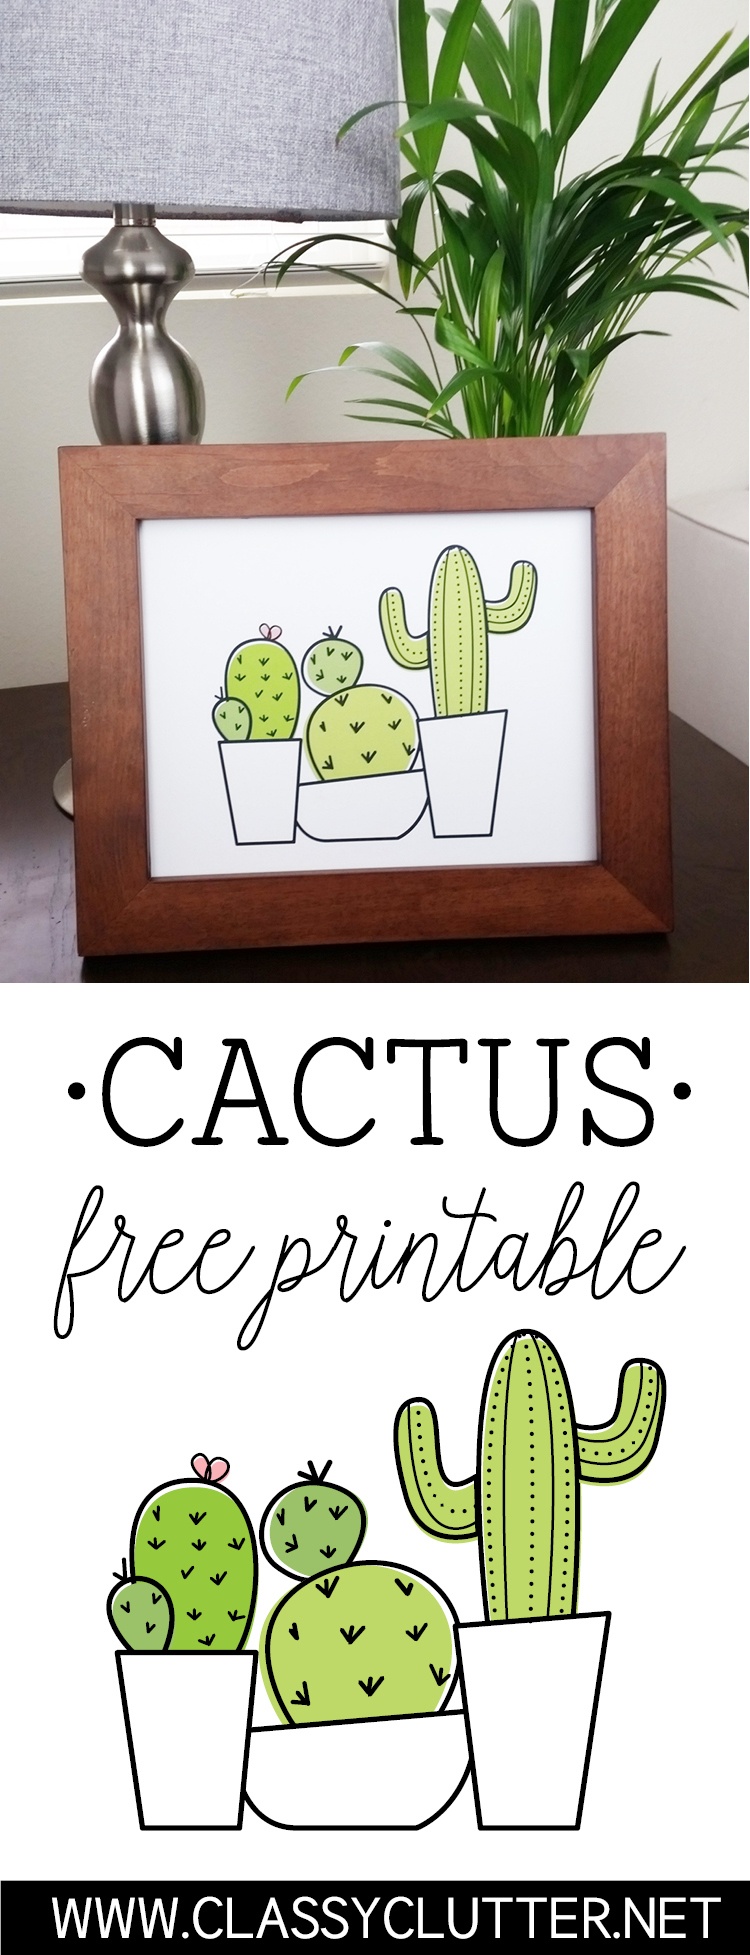 Free Cactus Printable - Classy Clutter - Free Cactus Printable